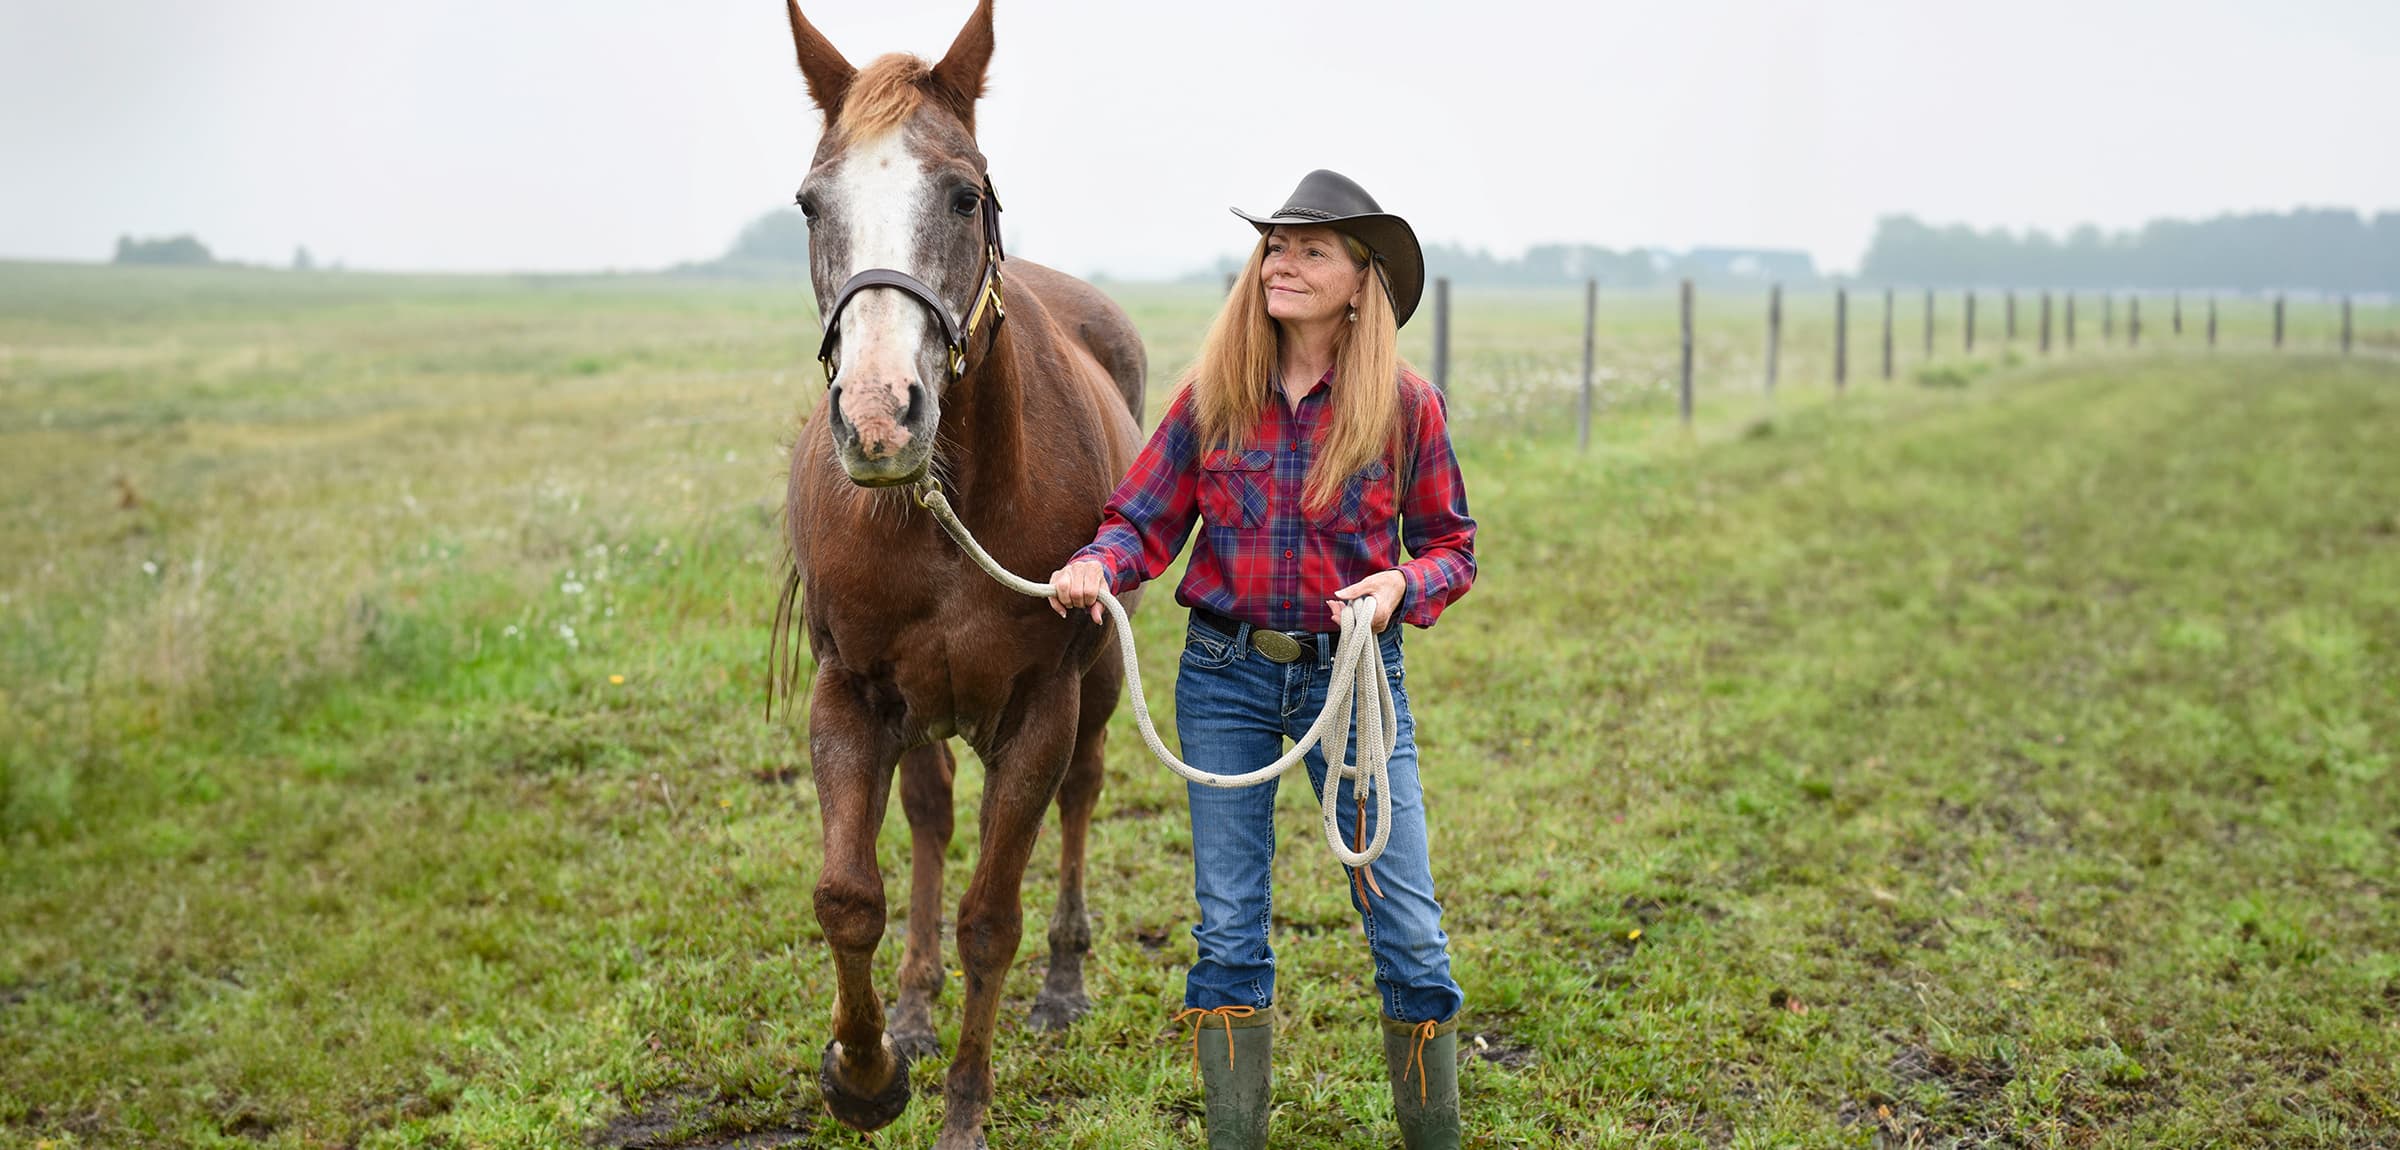 Women in a cowboy had standing in a field leading a chestnut coloured horse